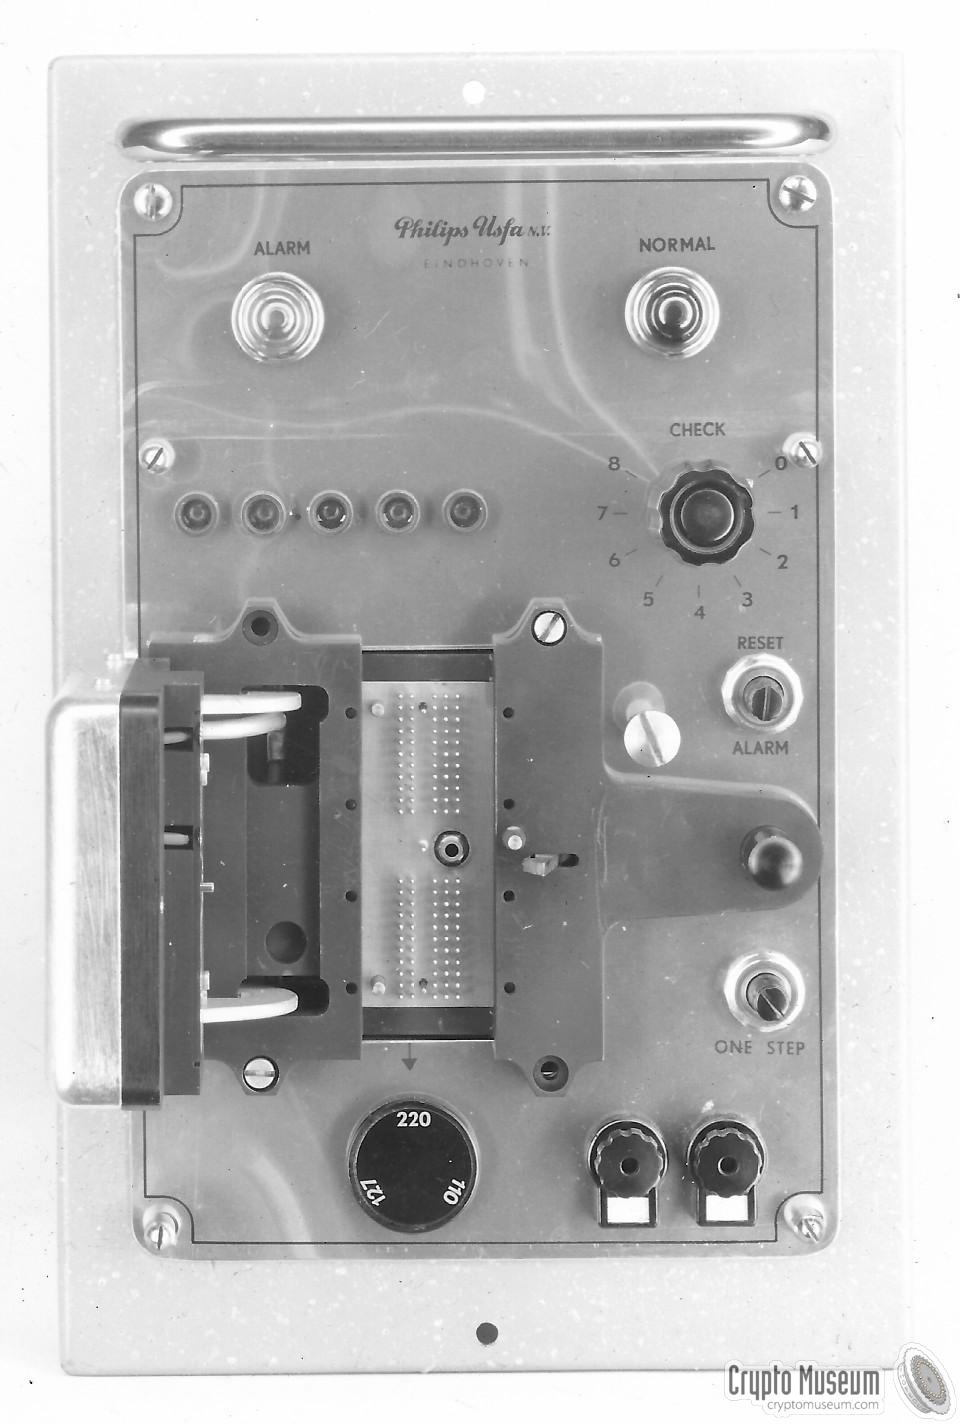 Later key tape reader with hinged access door